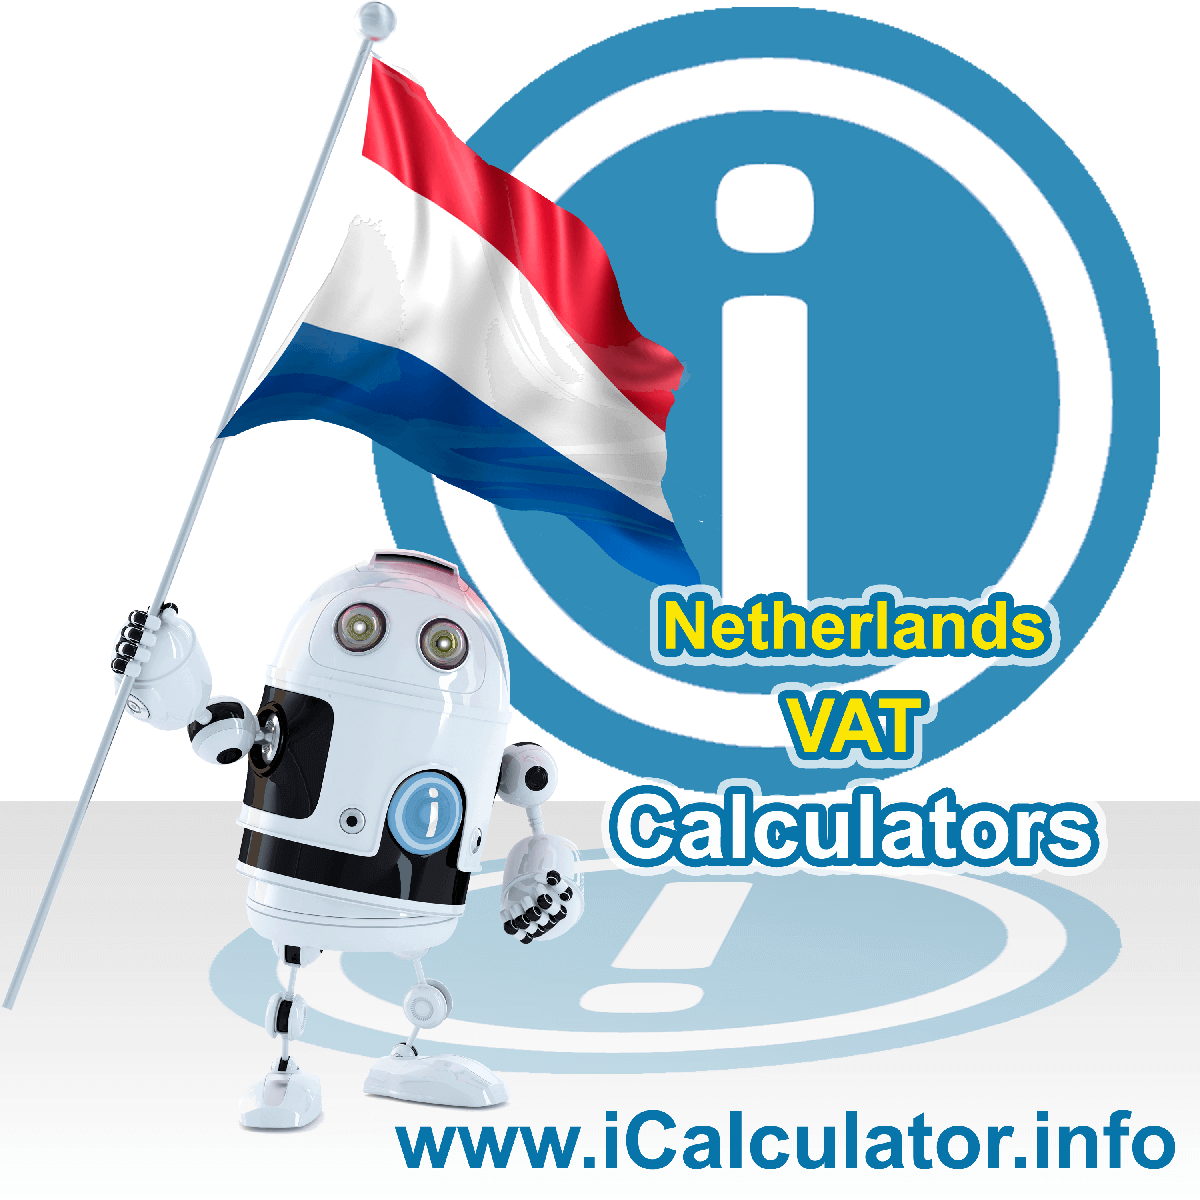 Netherlands VAT Calculator. This image shows the Netherlands flag and information relating to the VAT formula used for calculating Value Added Tax in Netherlands using the Netherlands VAT Calculator in 2023